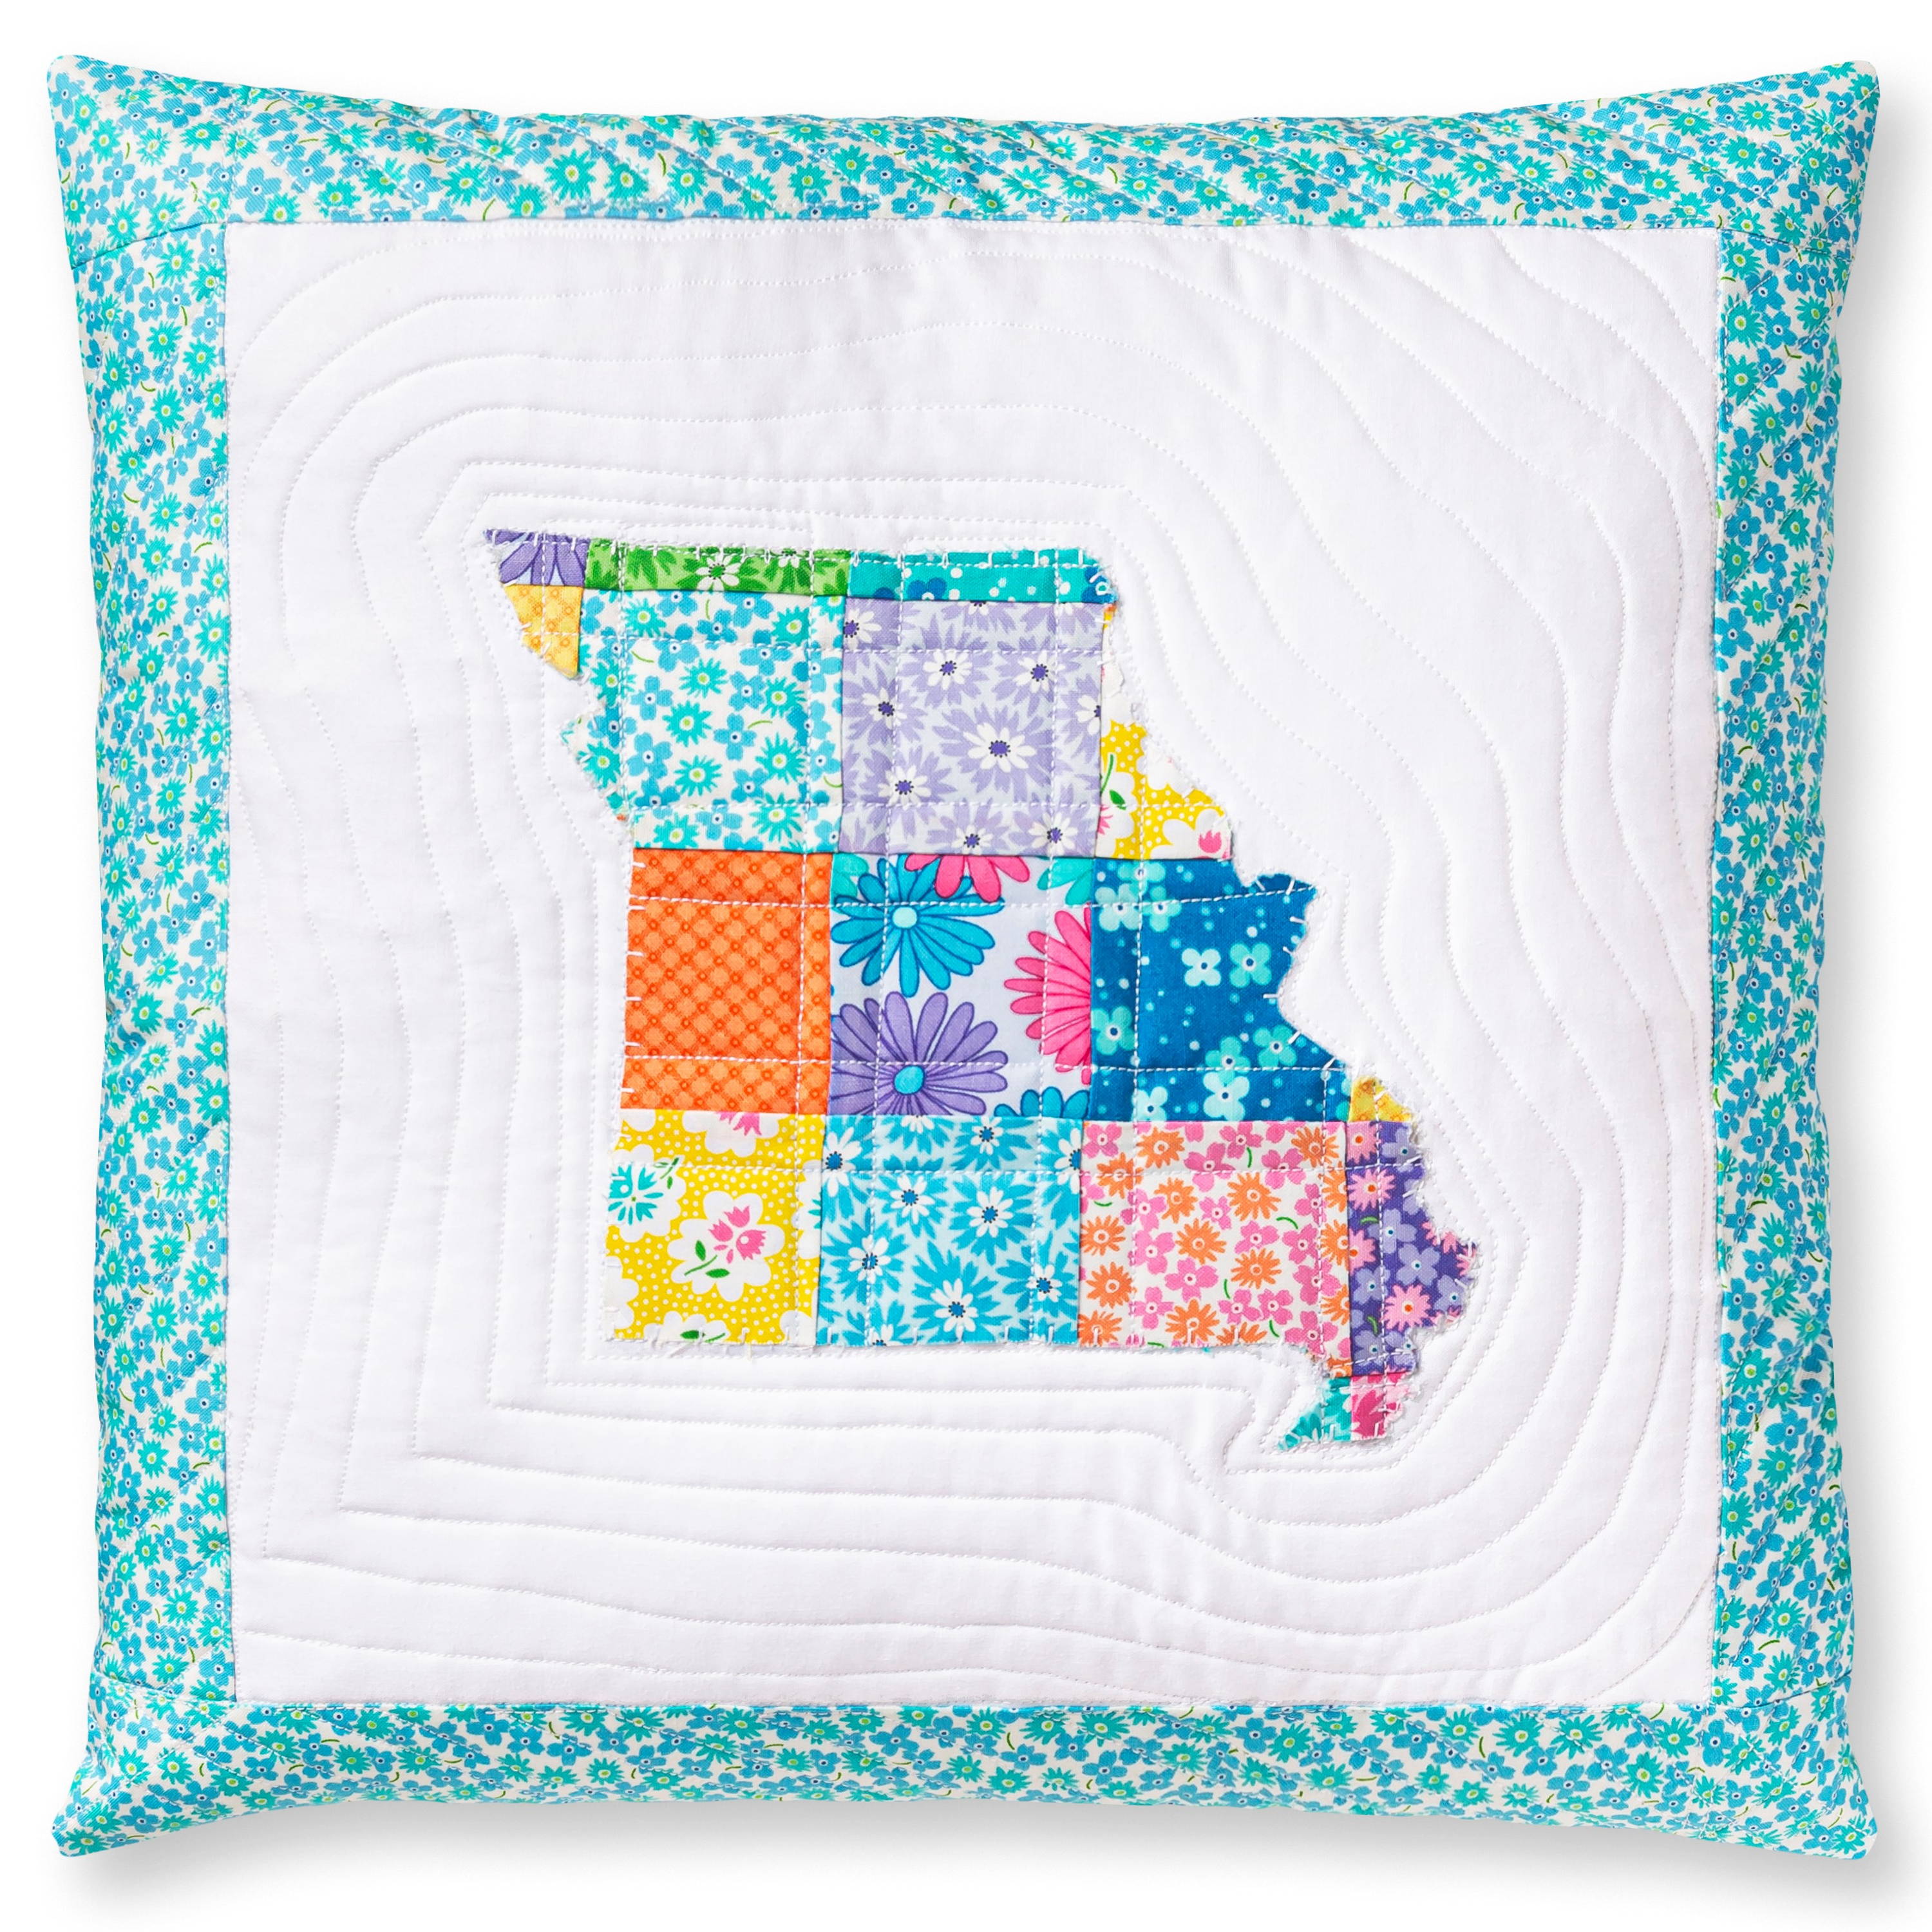 State map applique pillow project